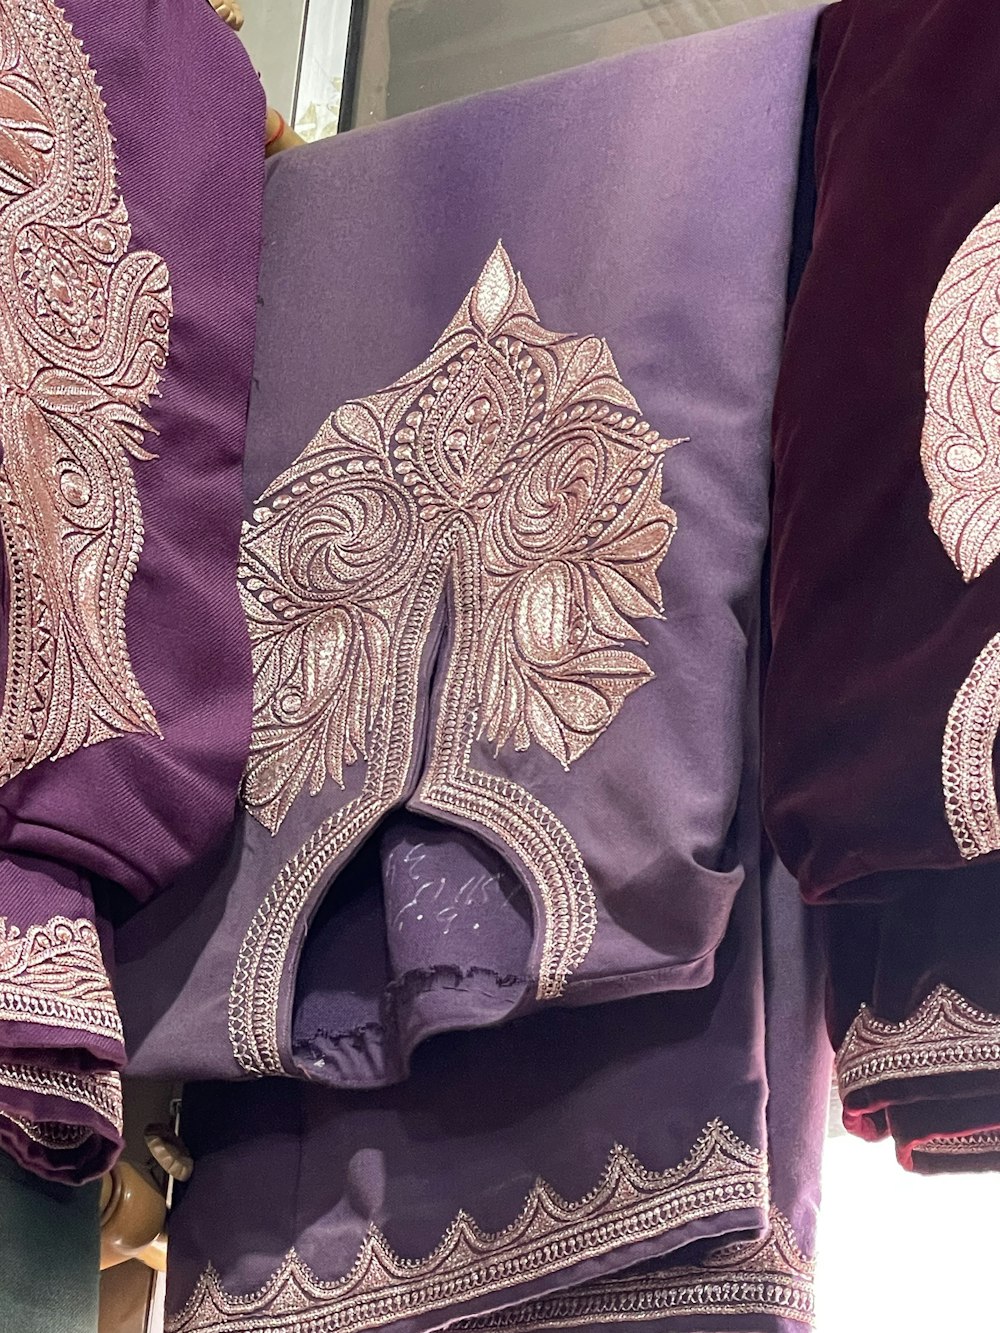 a display of purple and gold decorative items